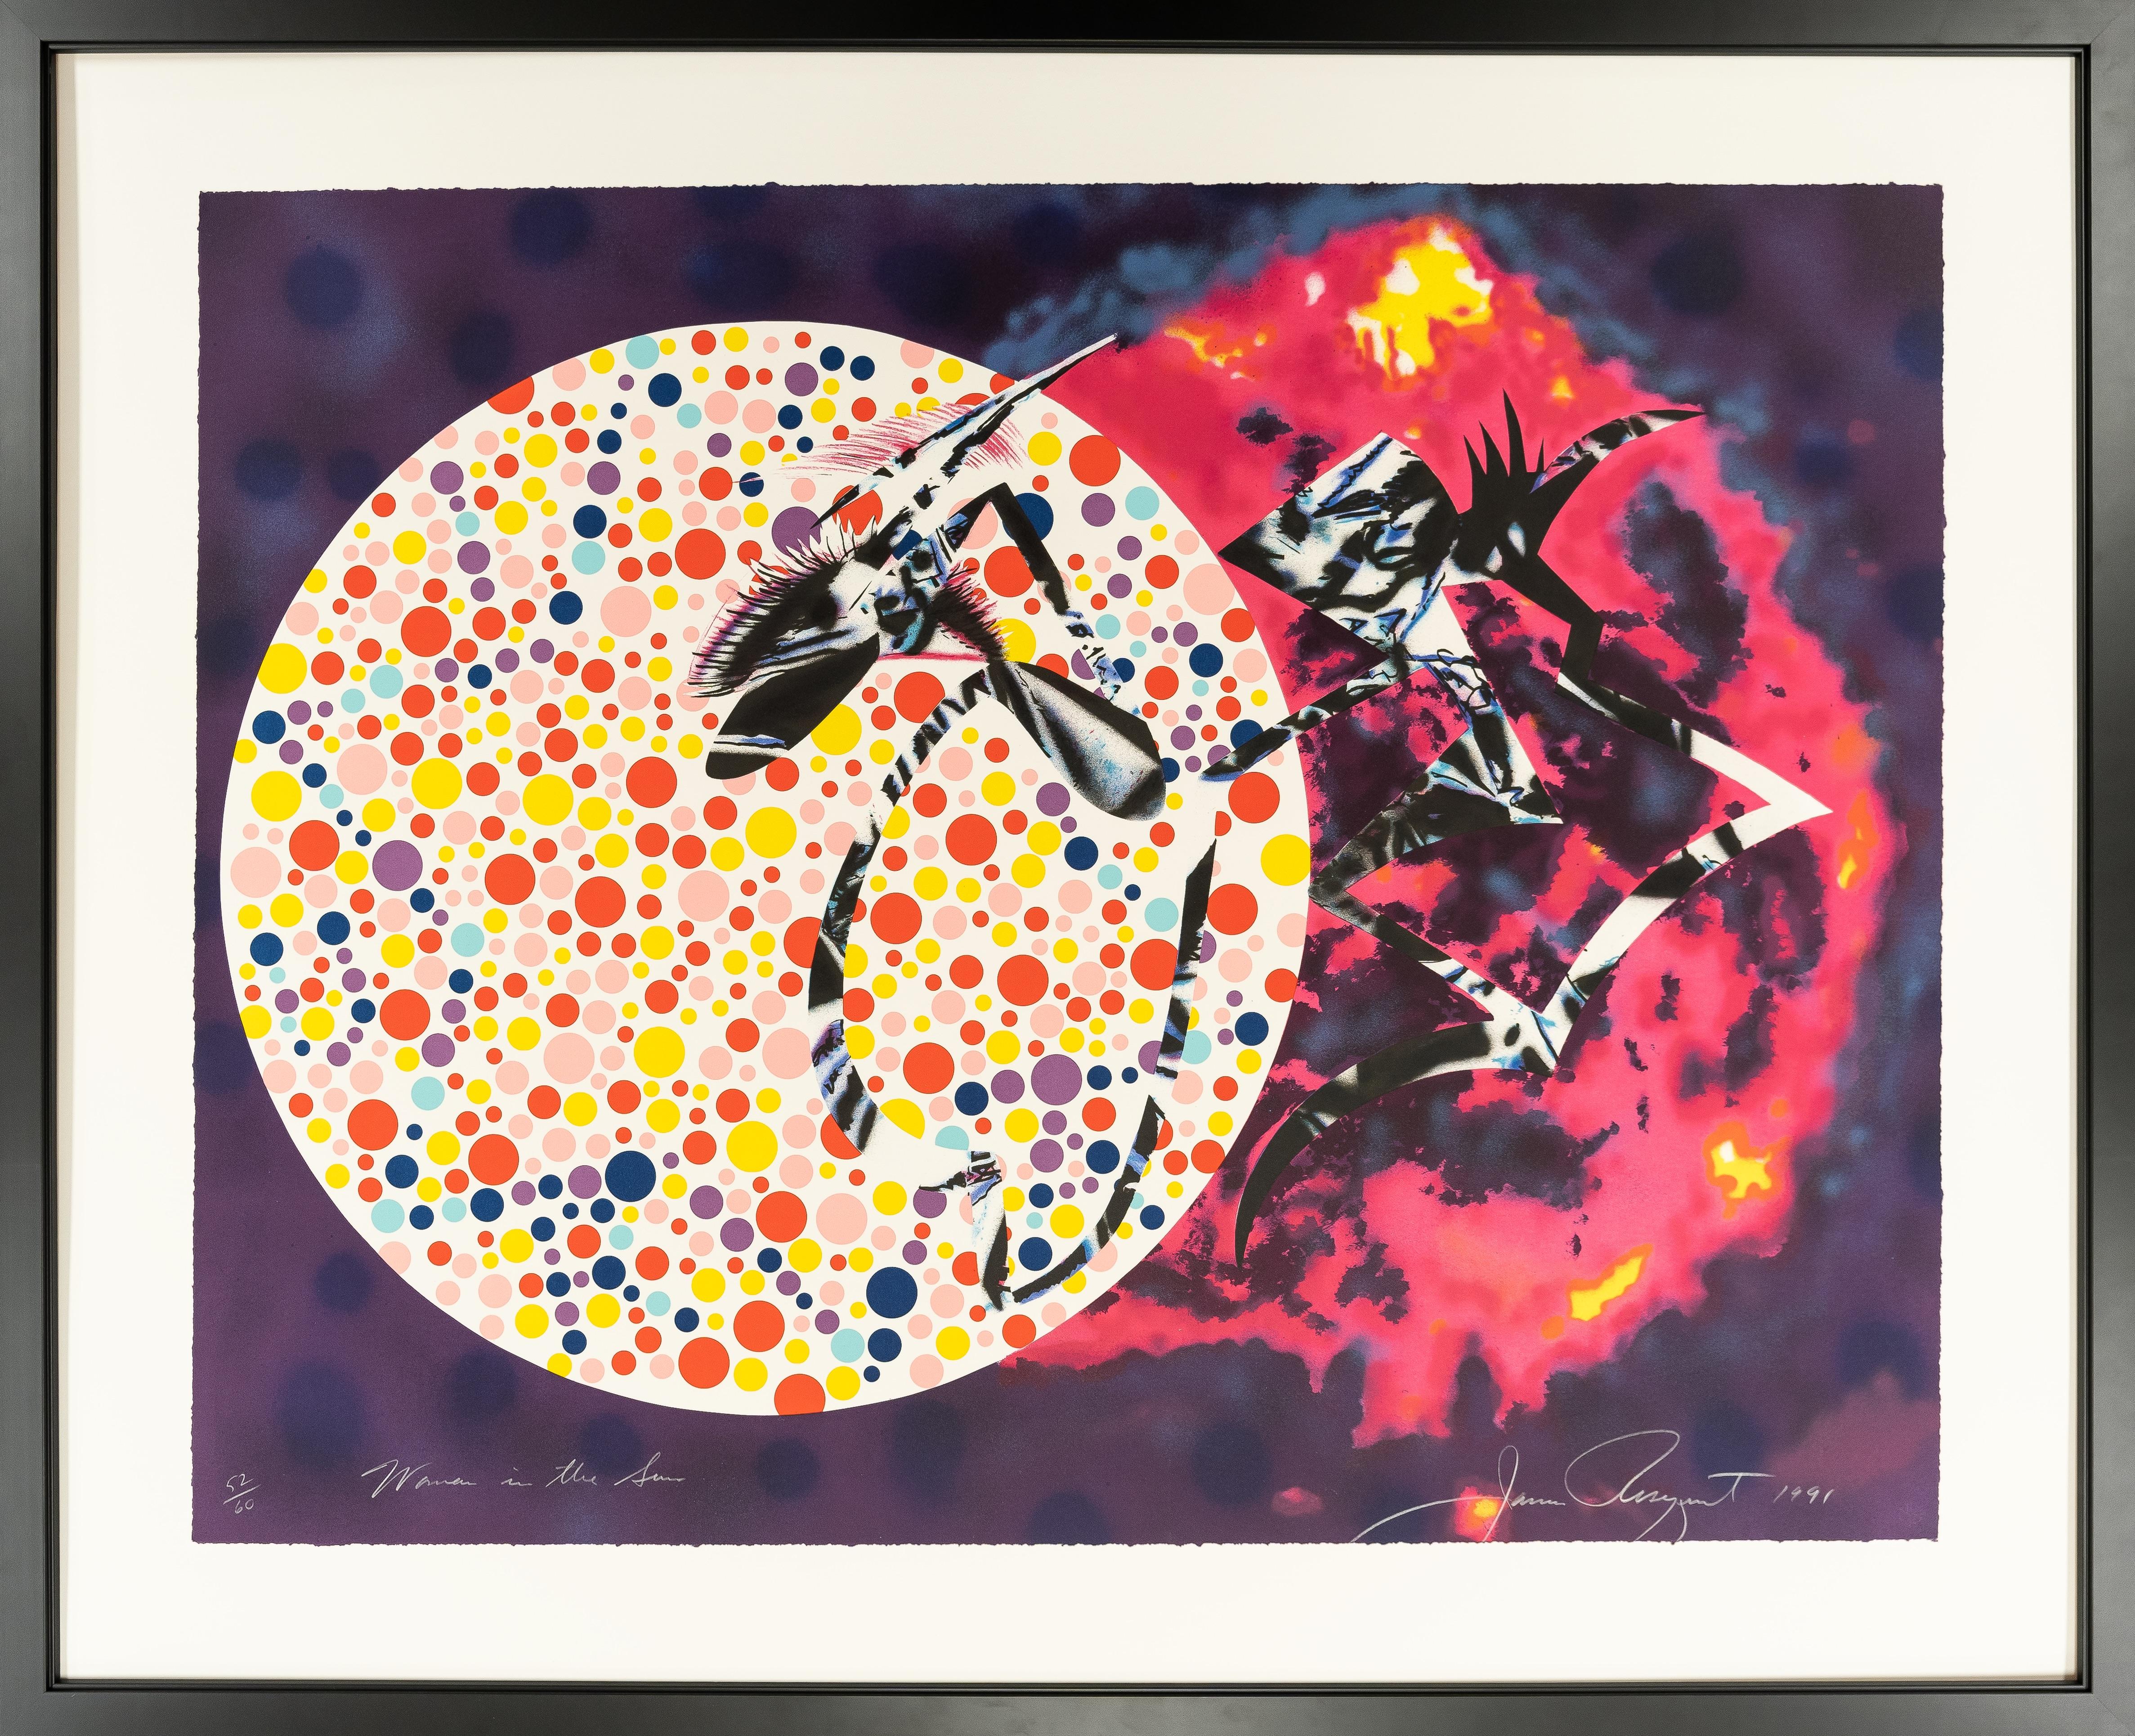 JAMES ROSENQUIST
   (B. 1933)

"Woman in the Sun"

15 color lithograph from aluminum plate on mould-made paper, white Rives BFK, 1991
Catalog #225
Sheet size: 33” x 42 ½” 
Edition number 52 of 60
Signed, numbered, dated, and titled in lower margin,